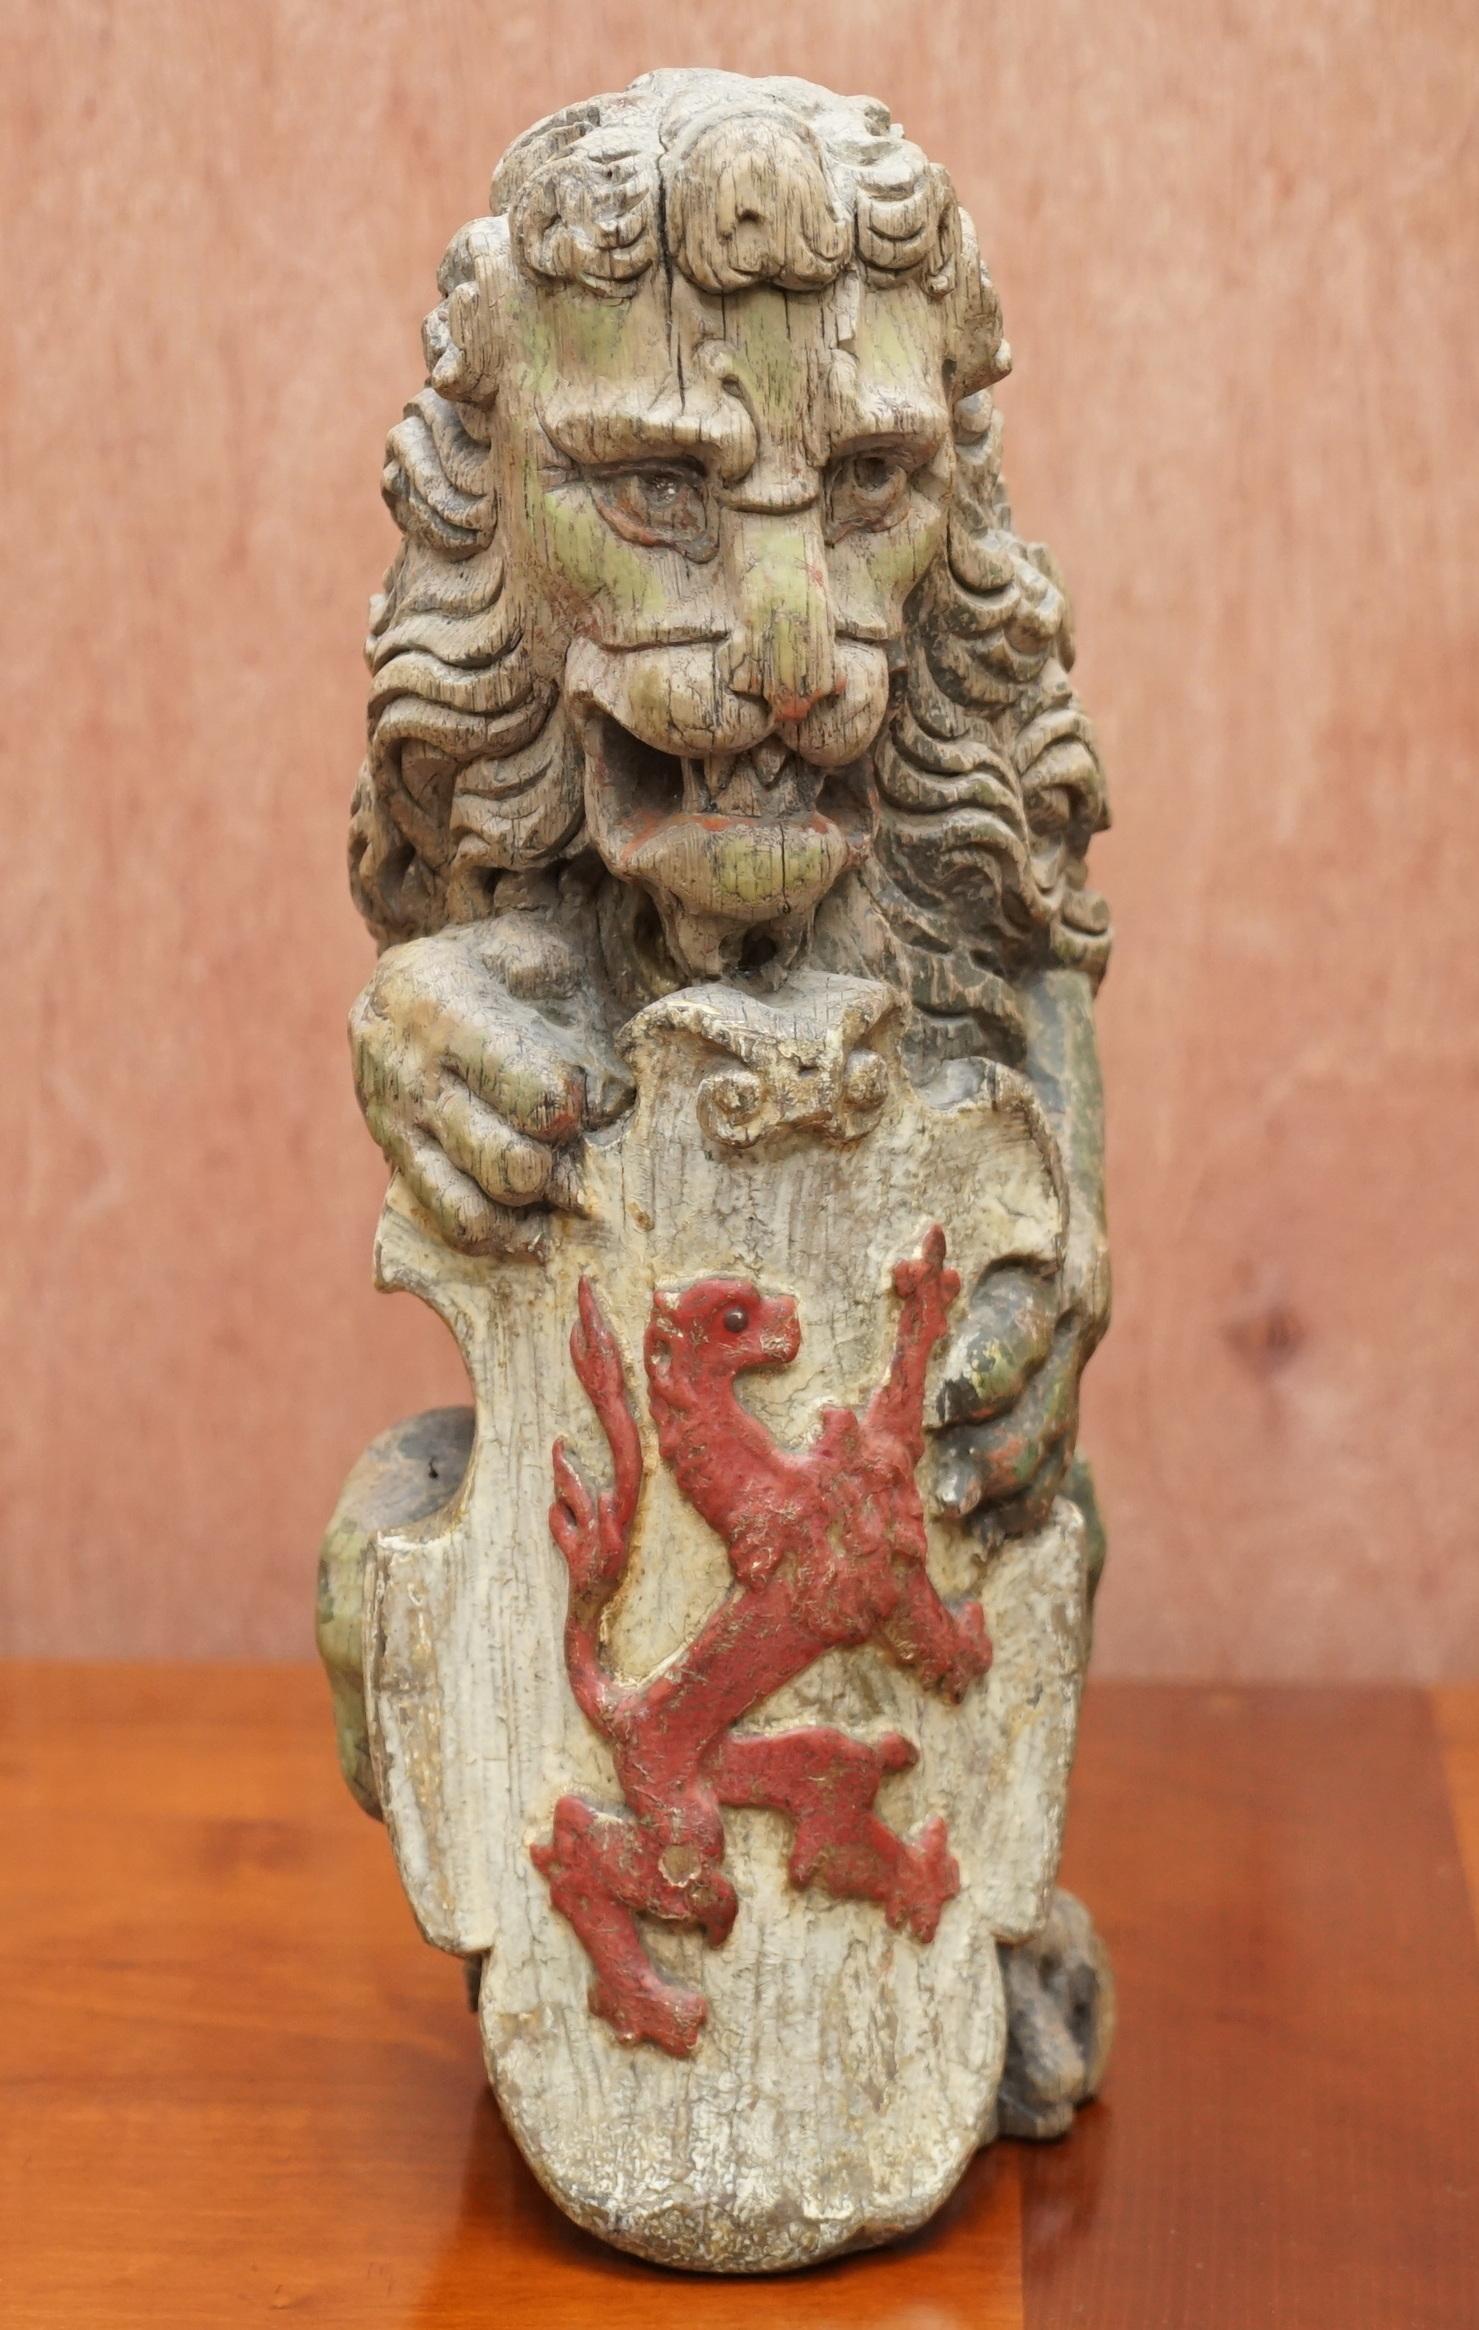 Jacobean Pair of 1615 English Polychrome Painted Heraldic Lion Newel Banisters Finials For Sale